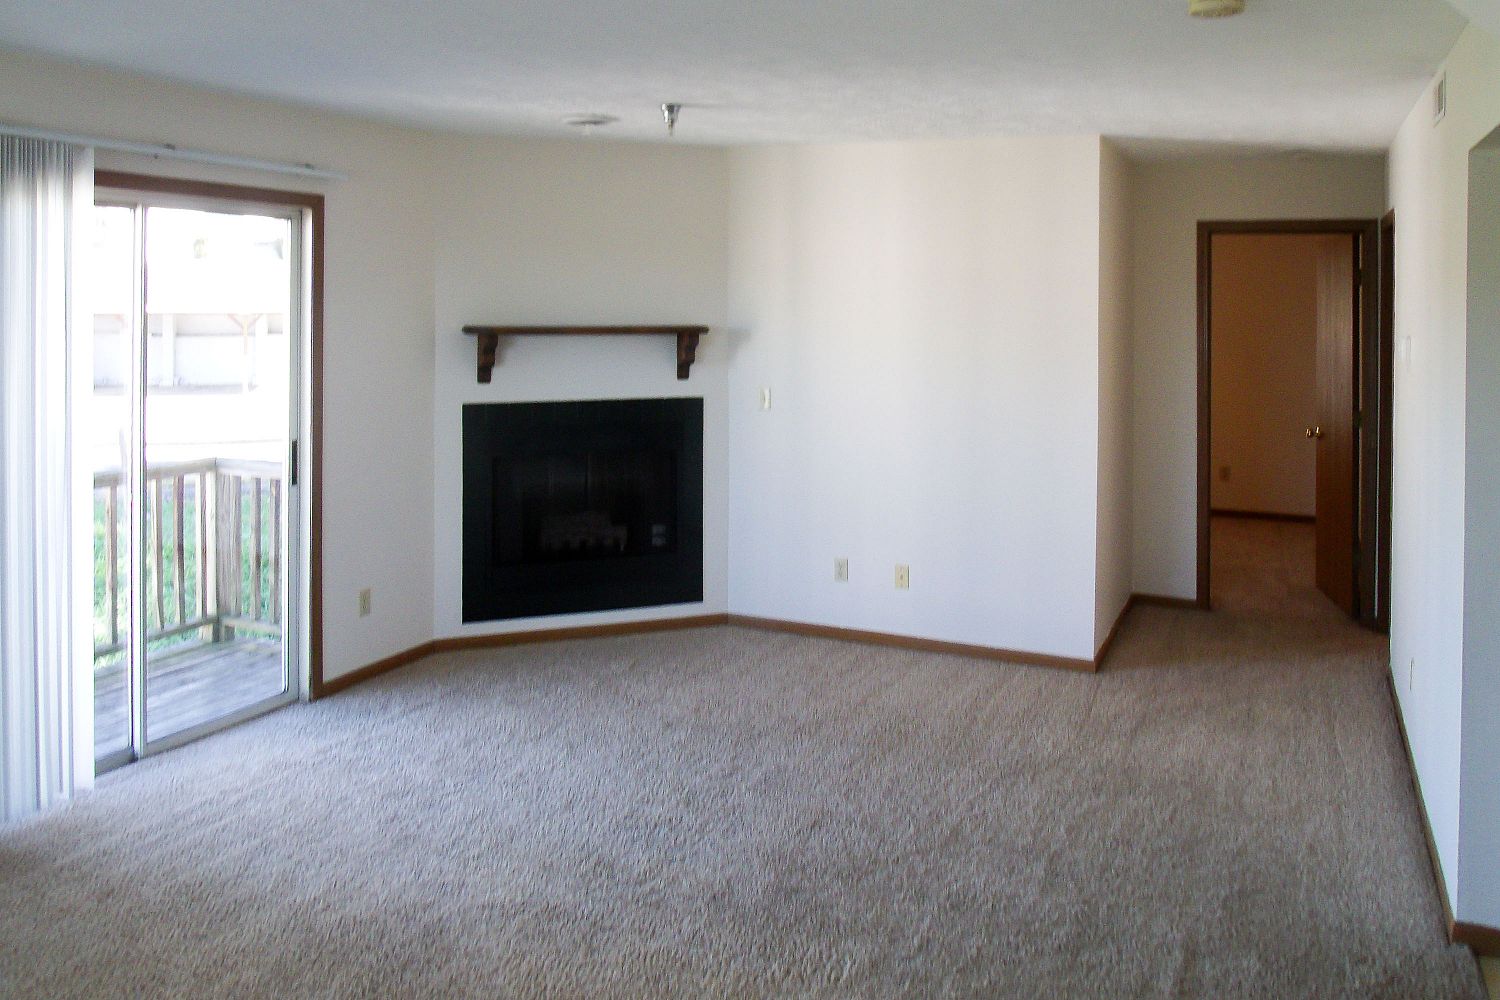 Welcome Arbors On Stewart Morgantown Apartments For Rent